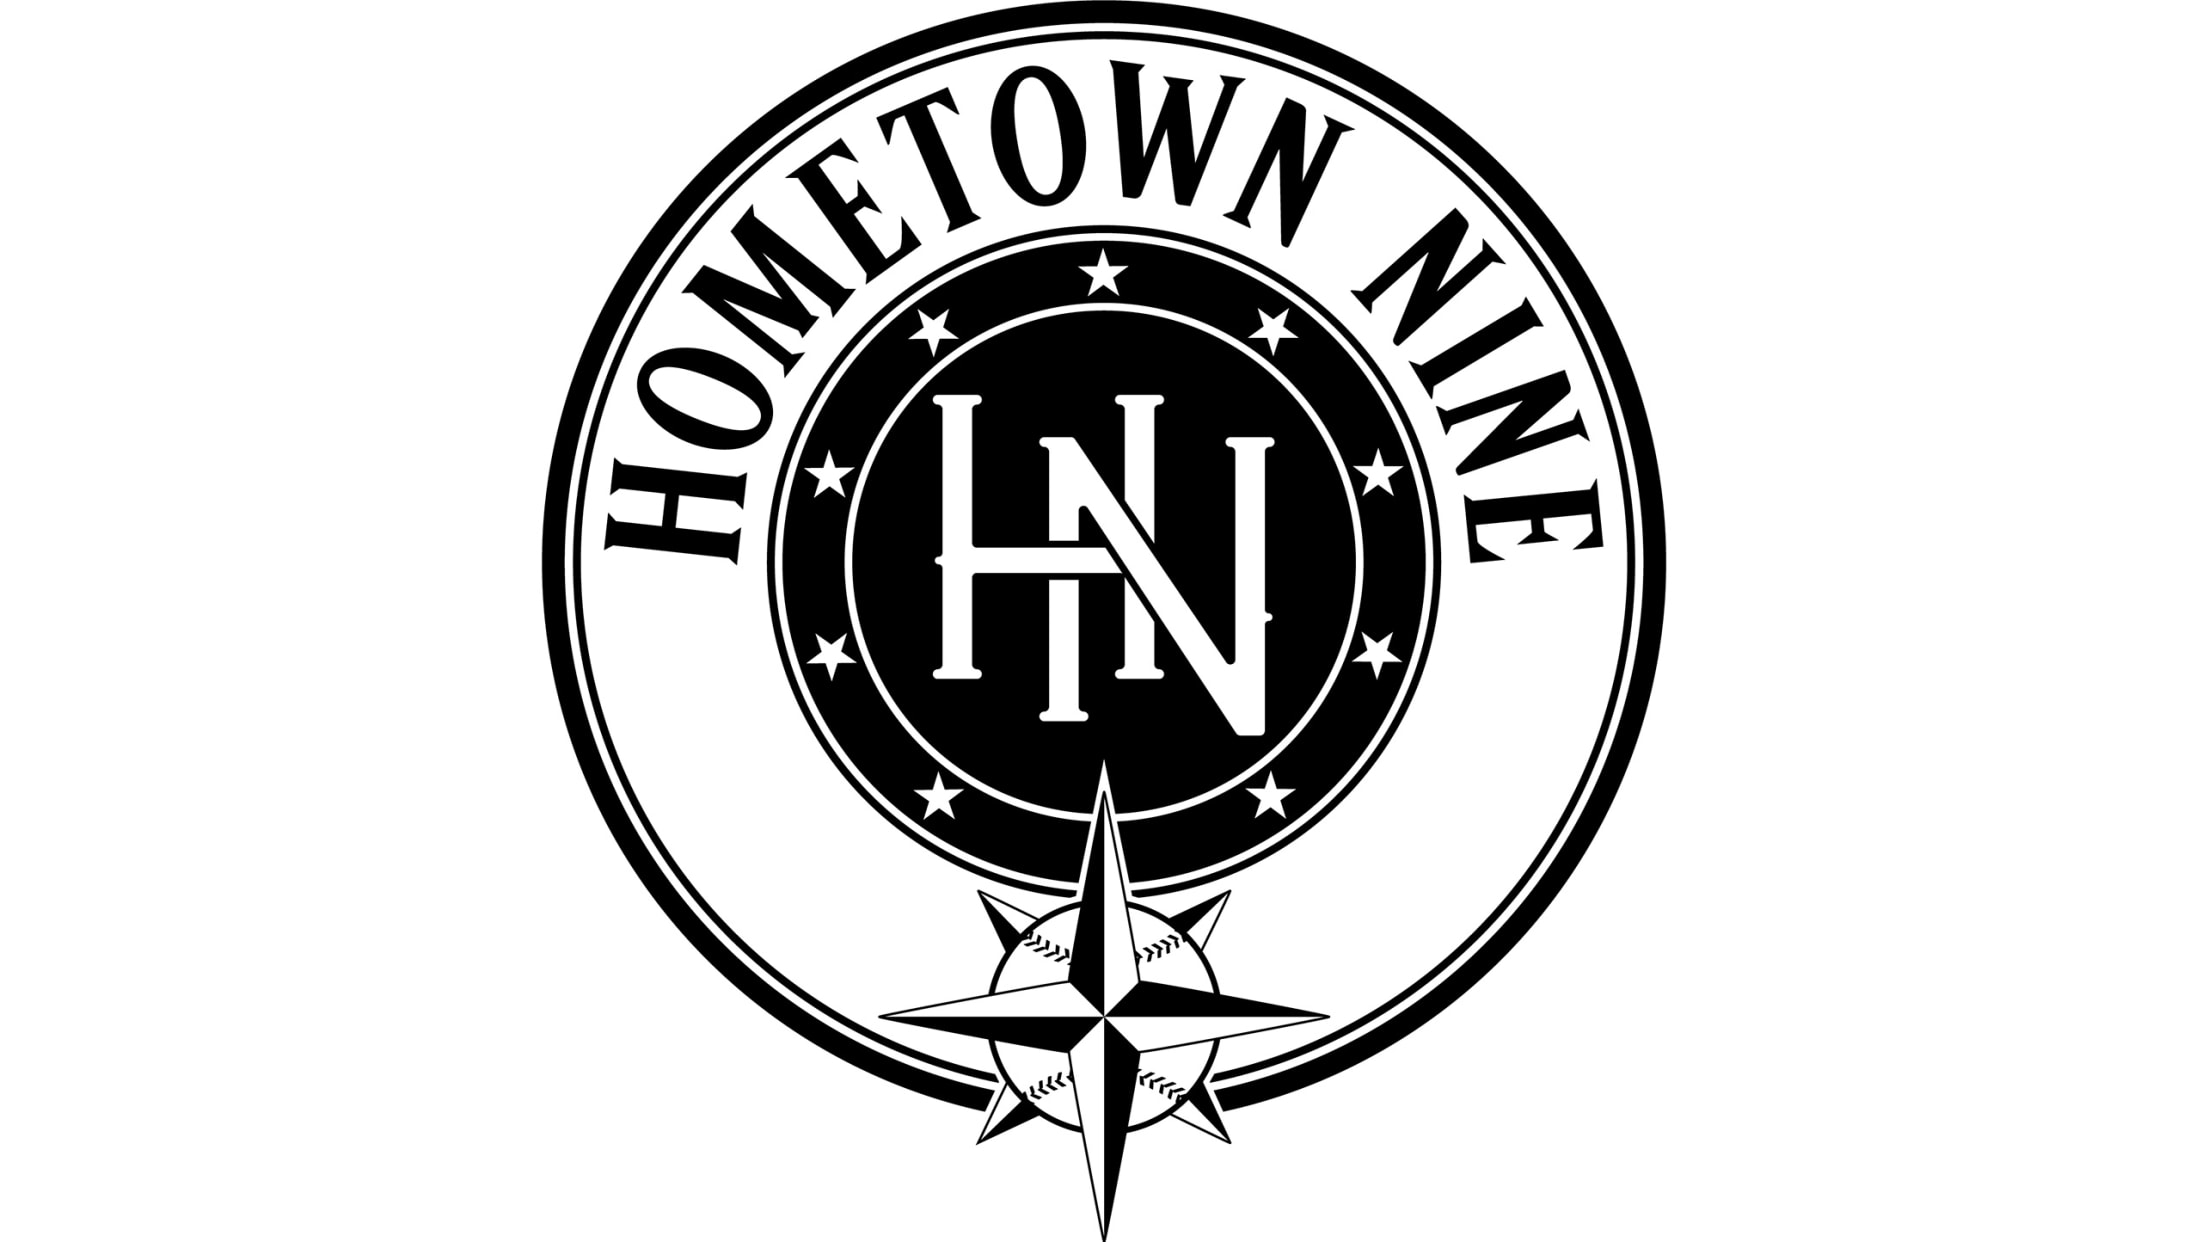 Applications Now Open for Hometown Nine Class of 2026